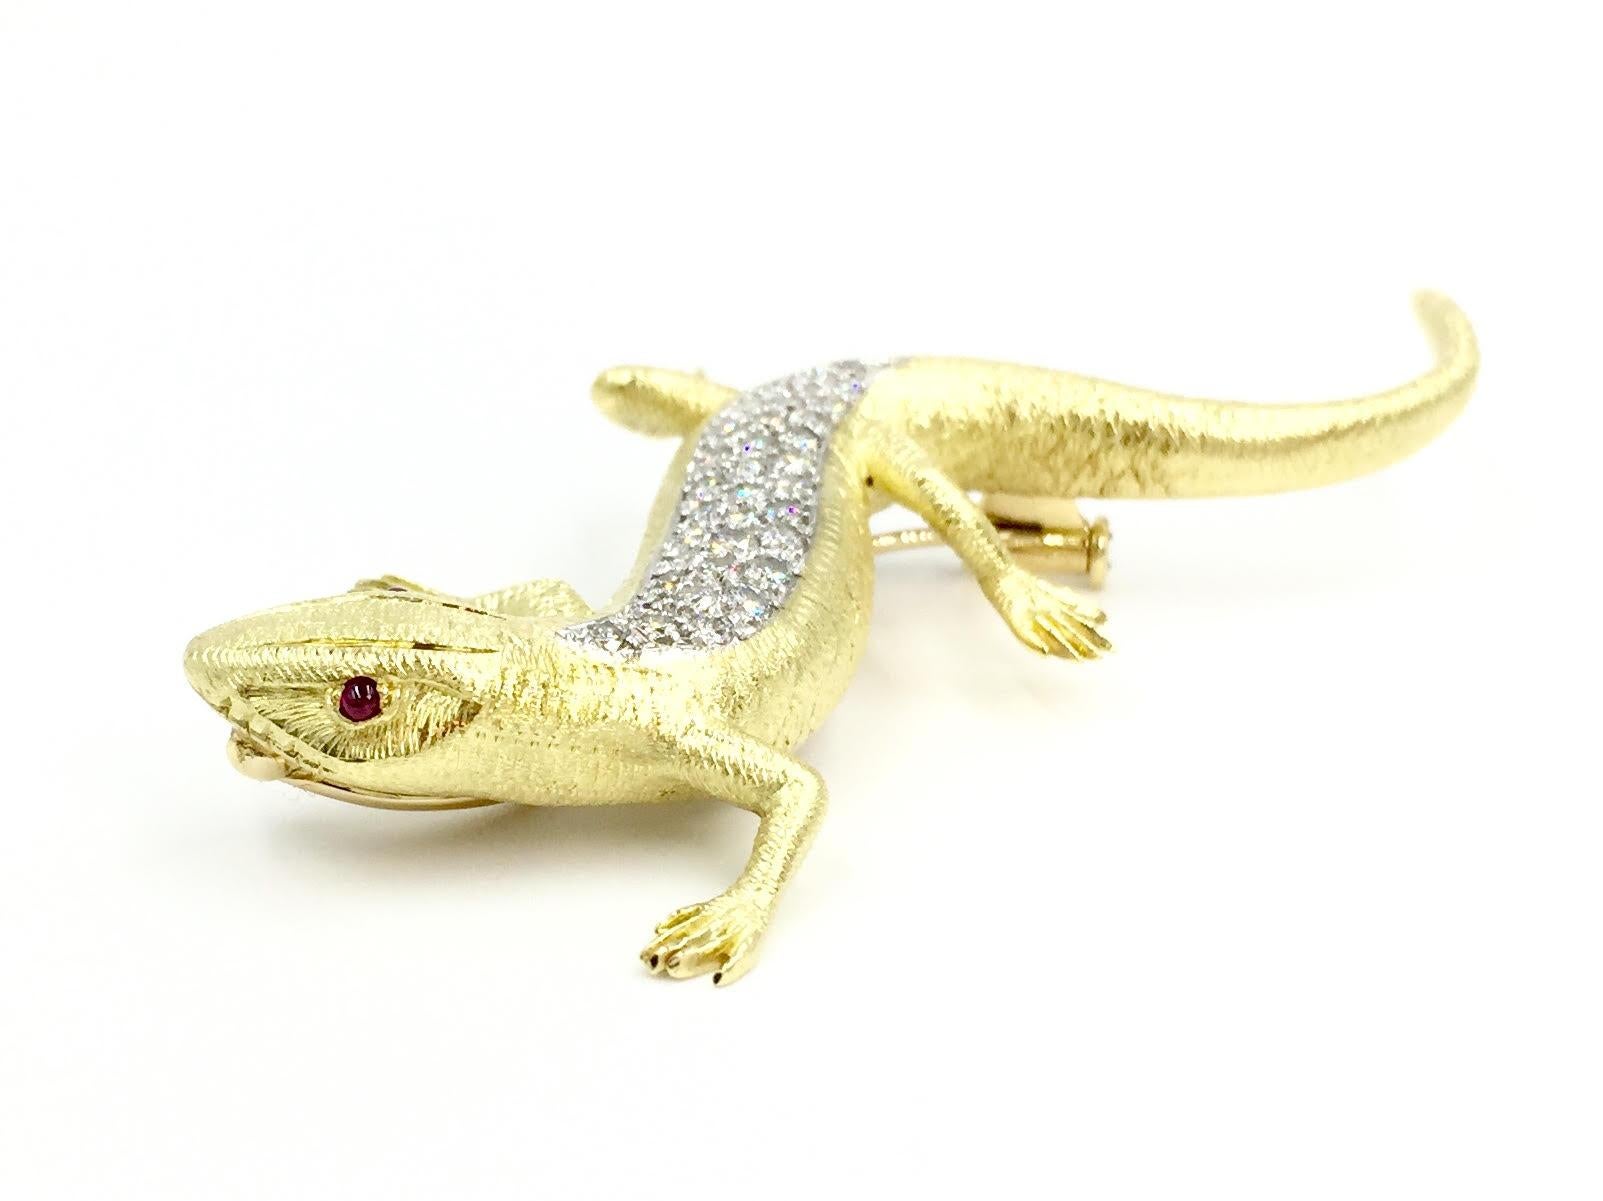 Created by E. Wolfe and Company, manufacturer of exquisite and whimsical designed animal brooches and fine jewelry since 1850. This 18 karat gold detailed lizard brooch features .71 carats of high quality diamonds, pavé set in white gold to give